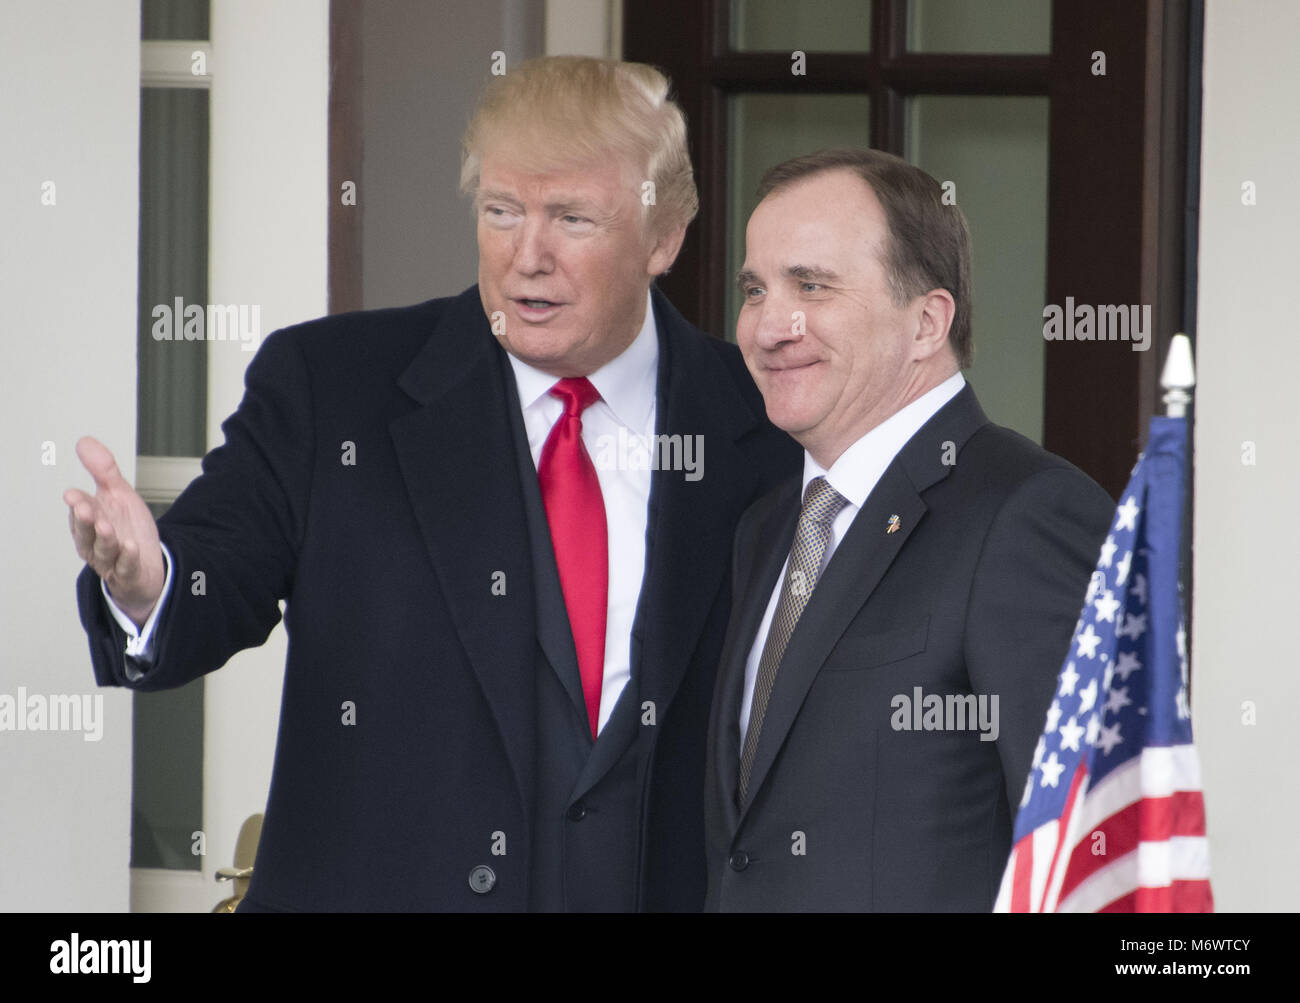 Washington, District of Columbia, USA. 6th Mar, 2018. United States President Donald J. Trump welcomes Prime Minister Stefan LÃ¶fven of Sweden to the White House in Washington, DC on Tuesday, March 6, 2018.Credit: Ron Sachs/CNP Credit: Ron Sachs/CNP/ZUMA Wire/Alamy Live News Stock Photo